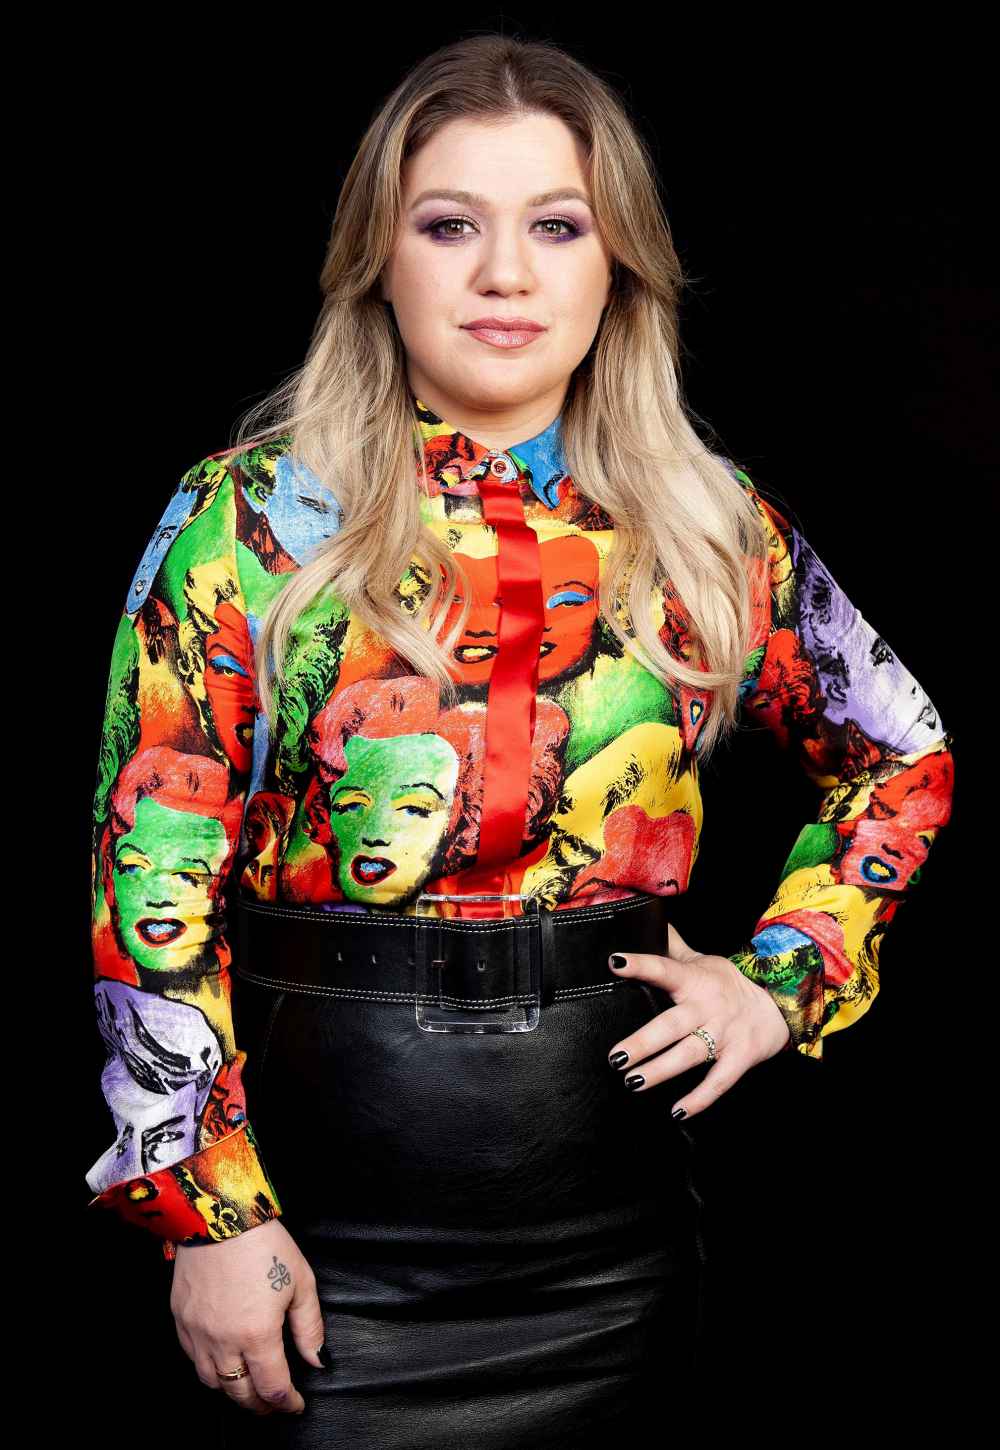 Kelly Clarkson Calls Out Police Looters Taking Advantage Protests